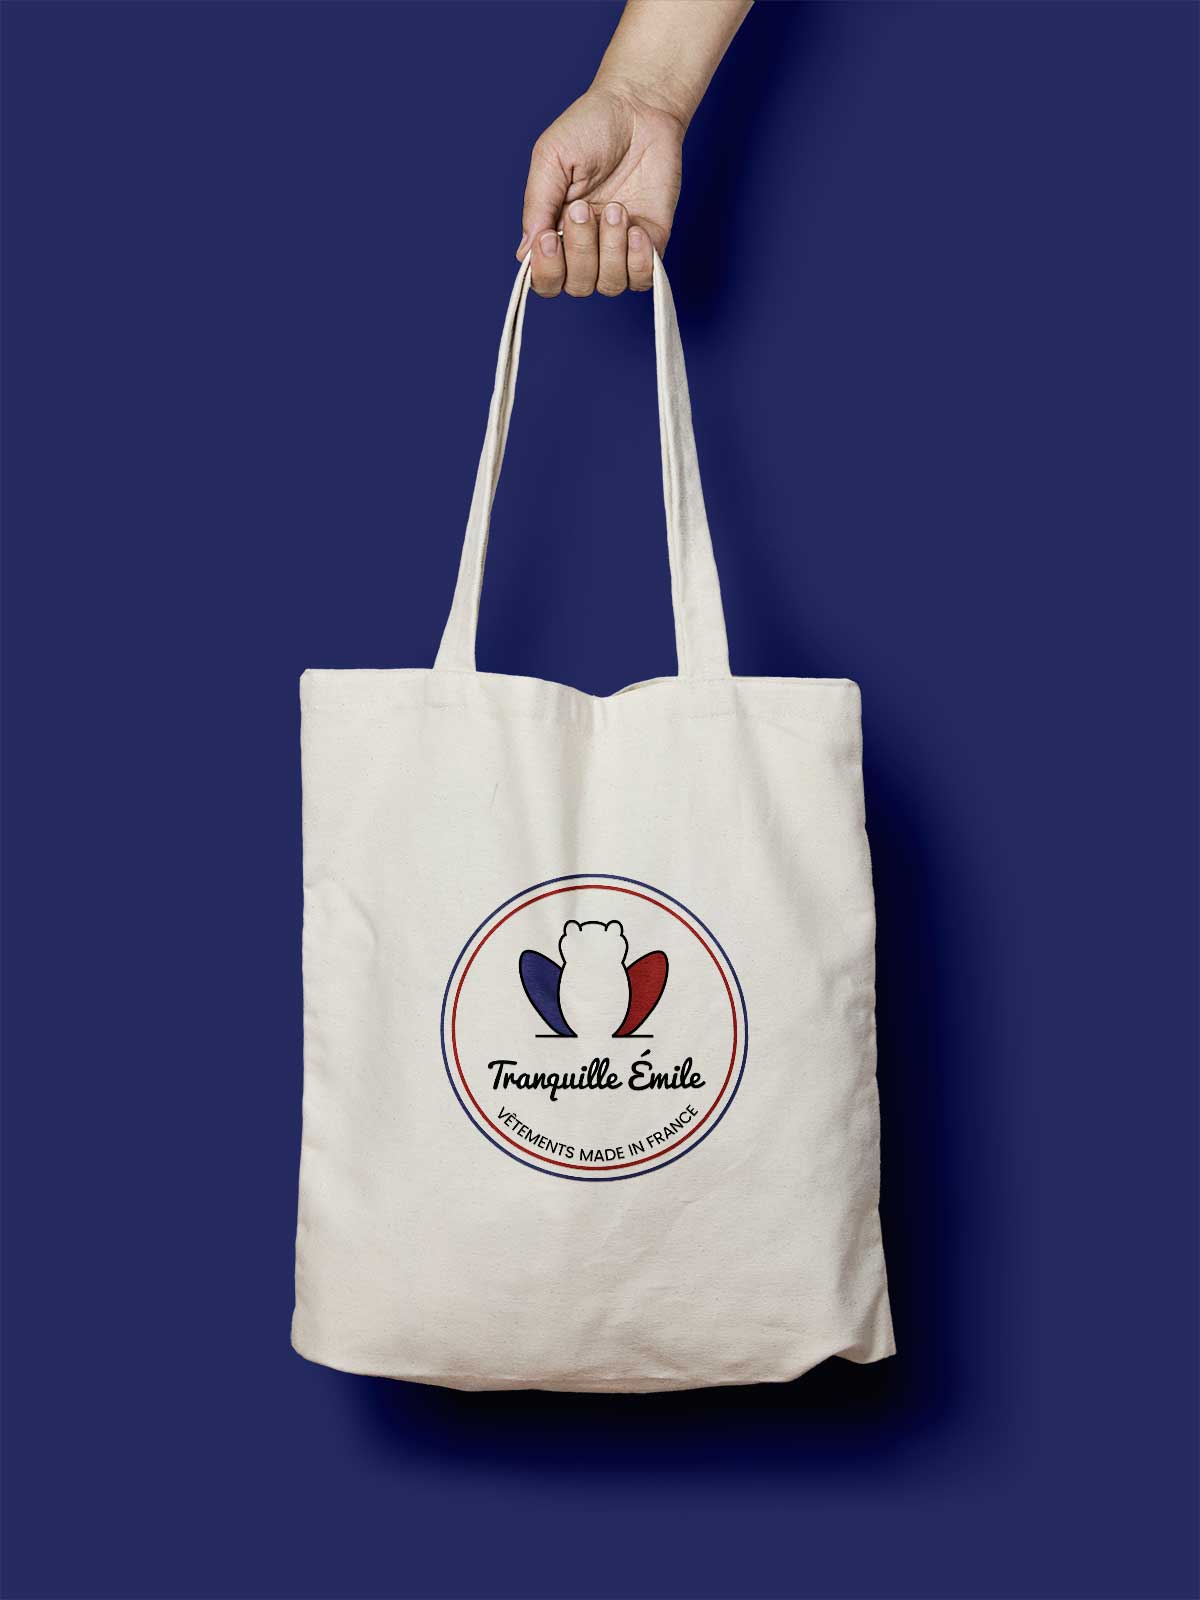 tote-bag-made-in-france-tranquille-emile